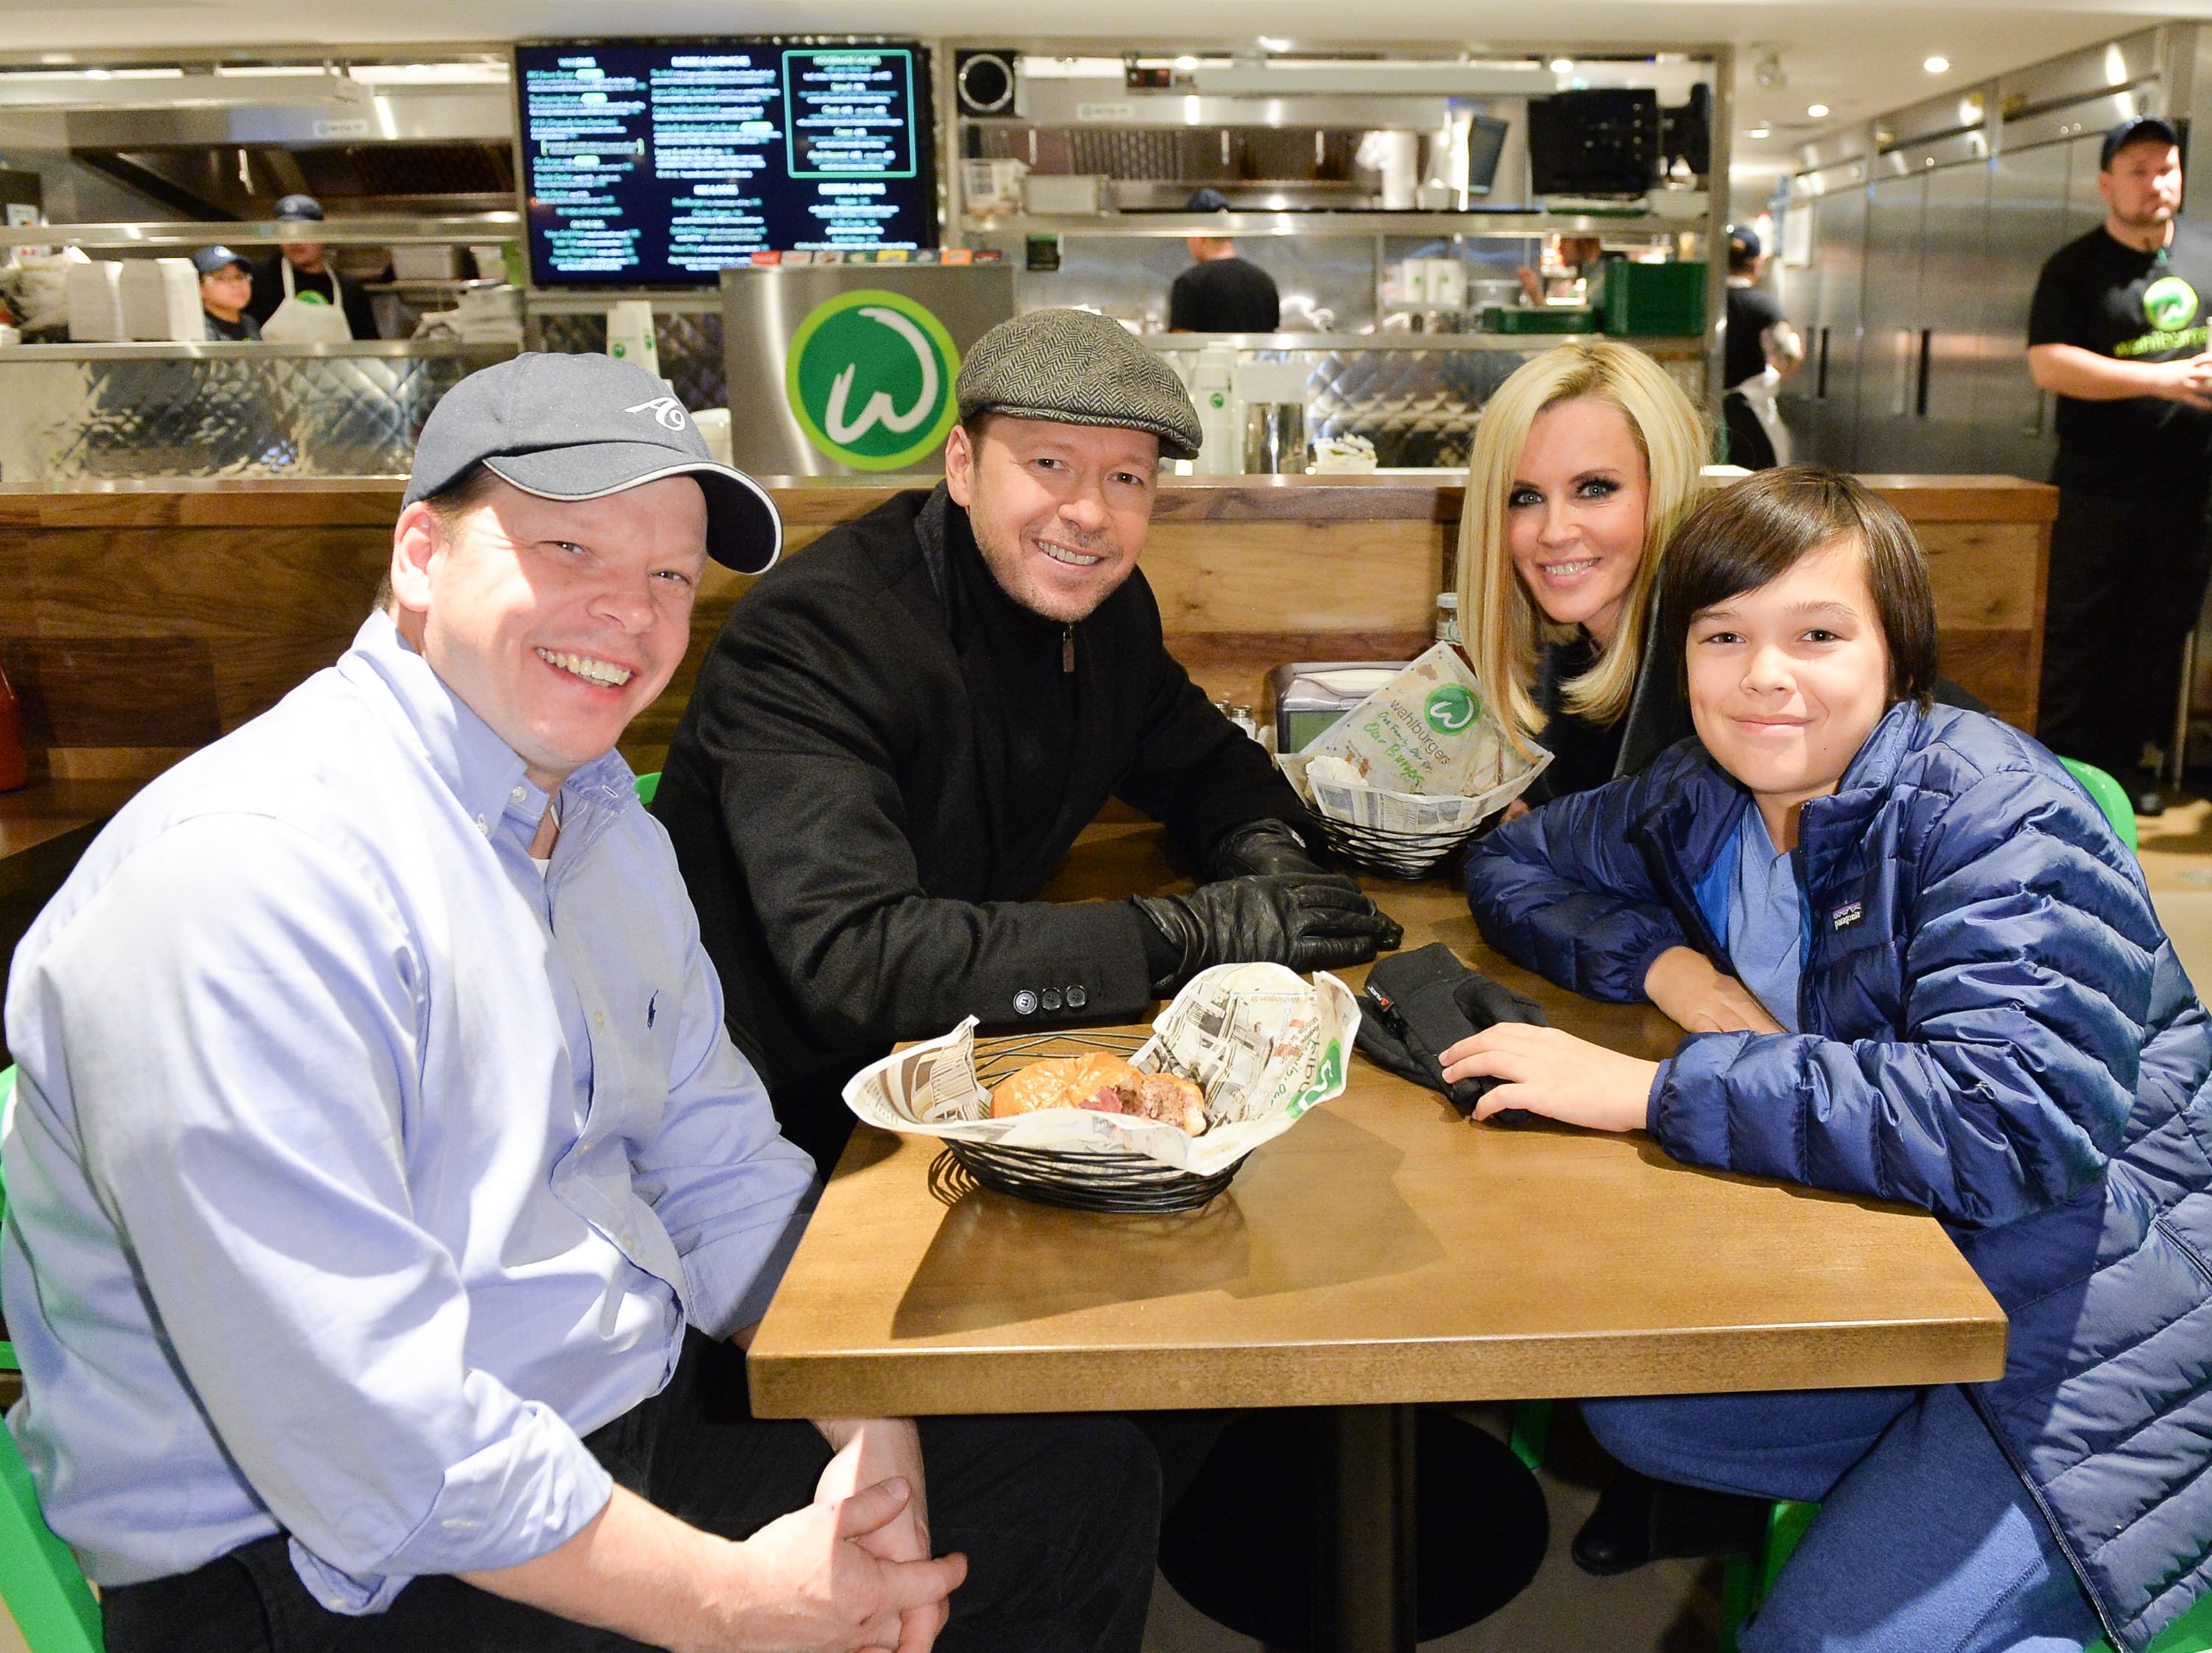 Paul Wahlberg, Donnie Wahlberg, Jenny McCarthy and Elijah Wahlberg enjoy a Wahlbuger at the launch of Wahlburgers Family Restaurant on November 15, 2014, in Toronto, Canada. | Source: Getty Images